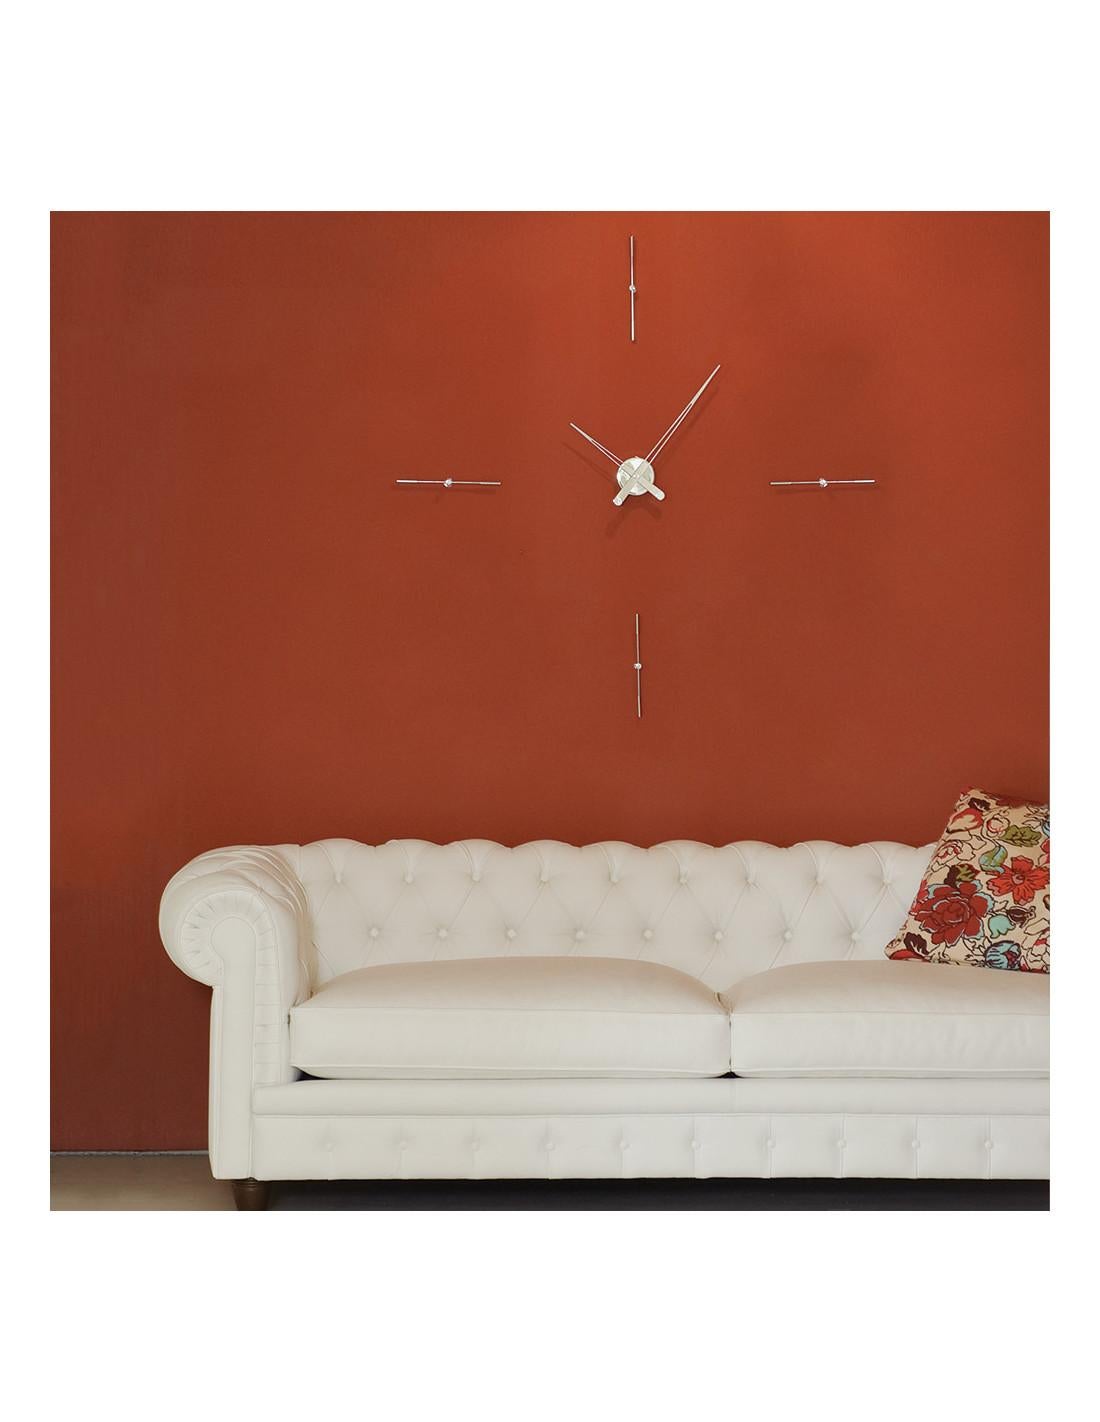 Merlín 4 i wall clock is ideal for decorating modern spaces of both a house and an office.
Merlín 4 i wall clock : Case made of chromed steel, Clock hand made of Polished Steel or painted in black, White and red.
Each clock is a unique handmade